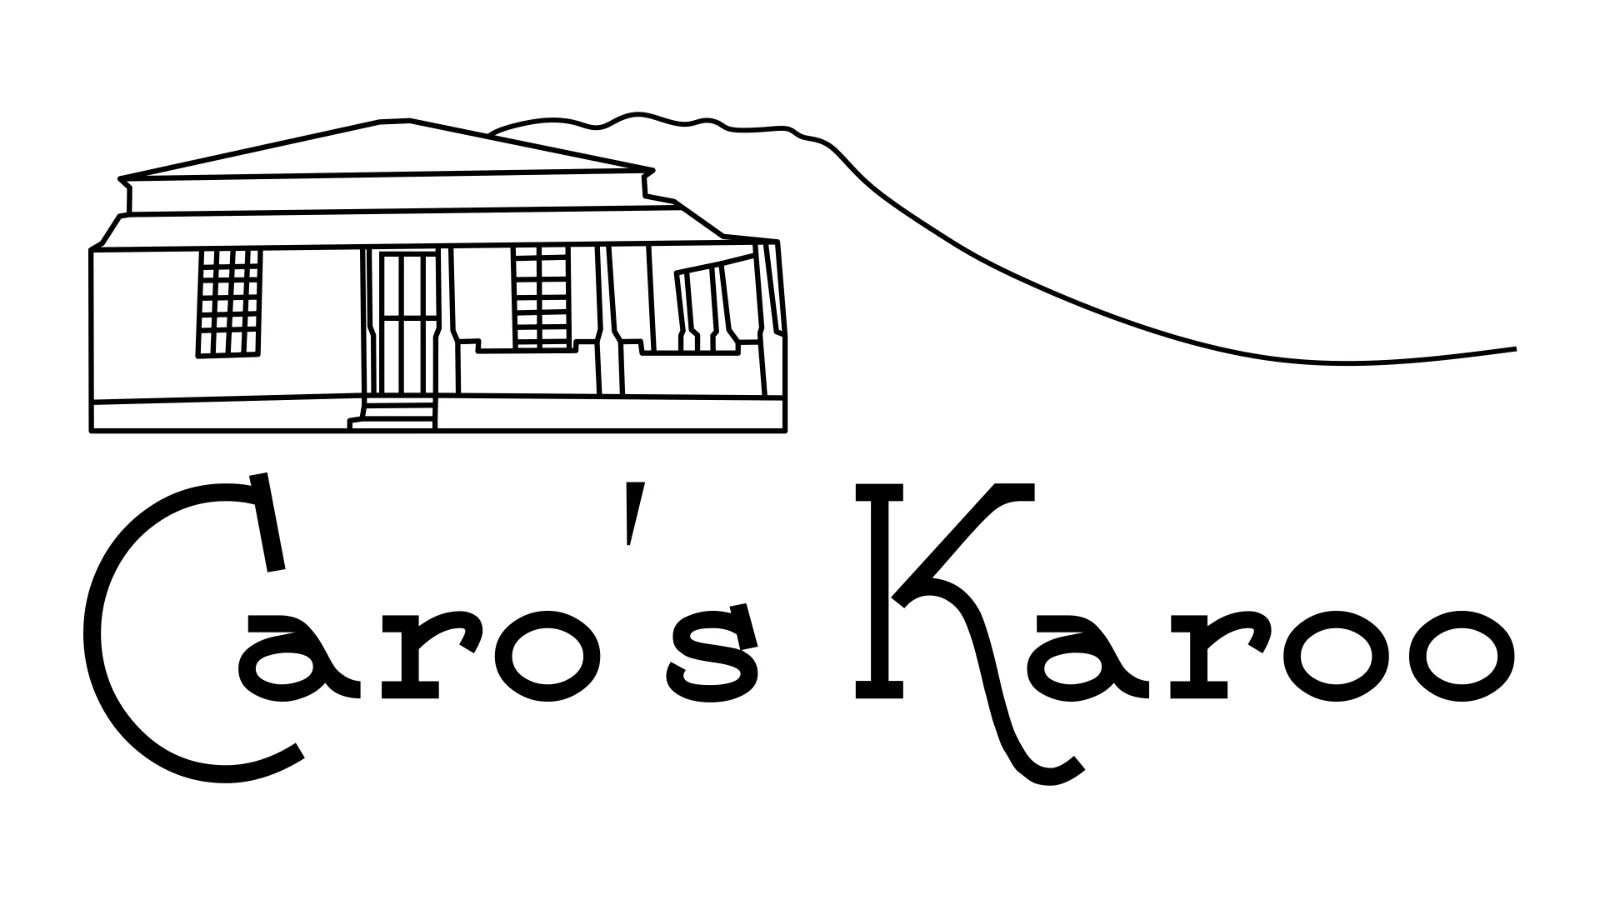 Cottage Accommodation in Victoria West - Caro's Karoo